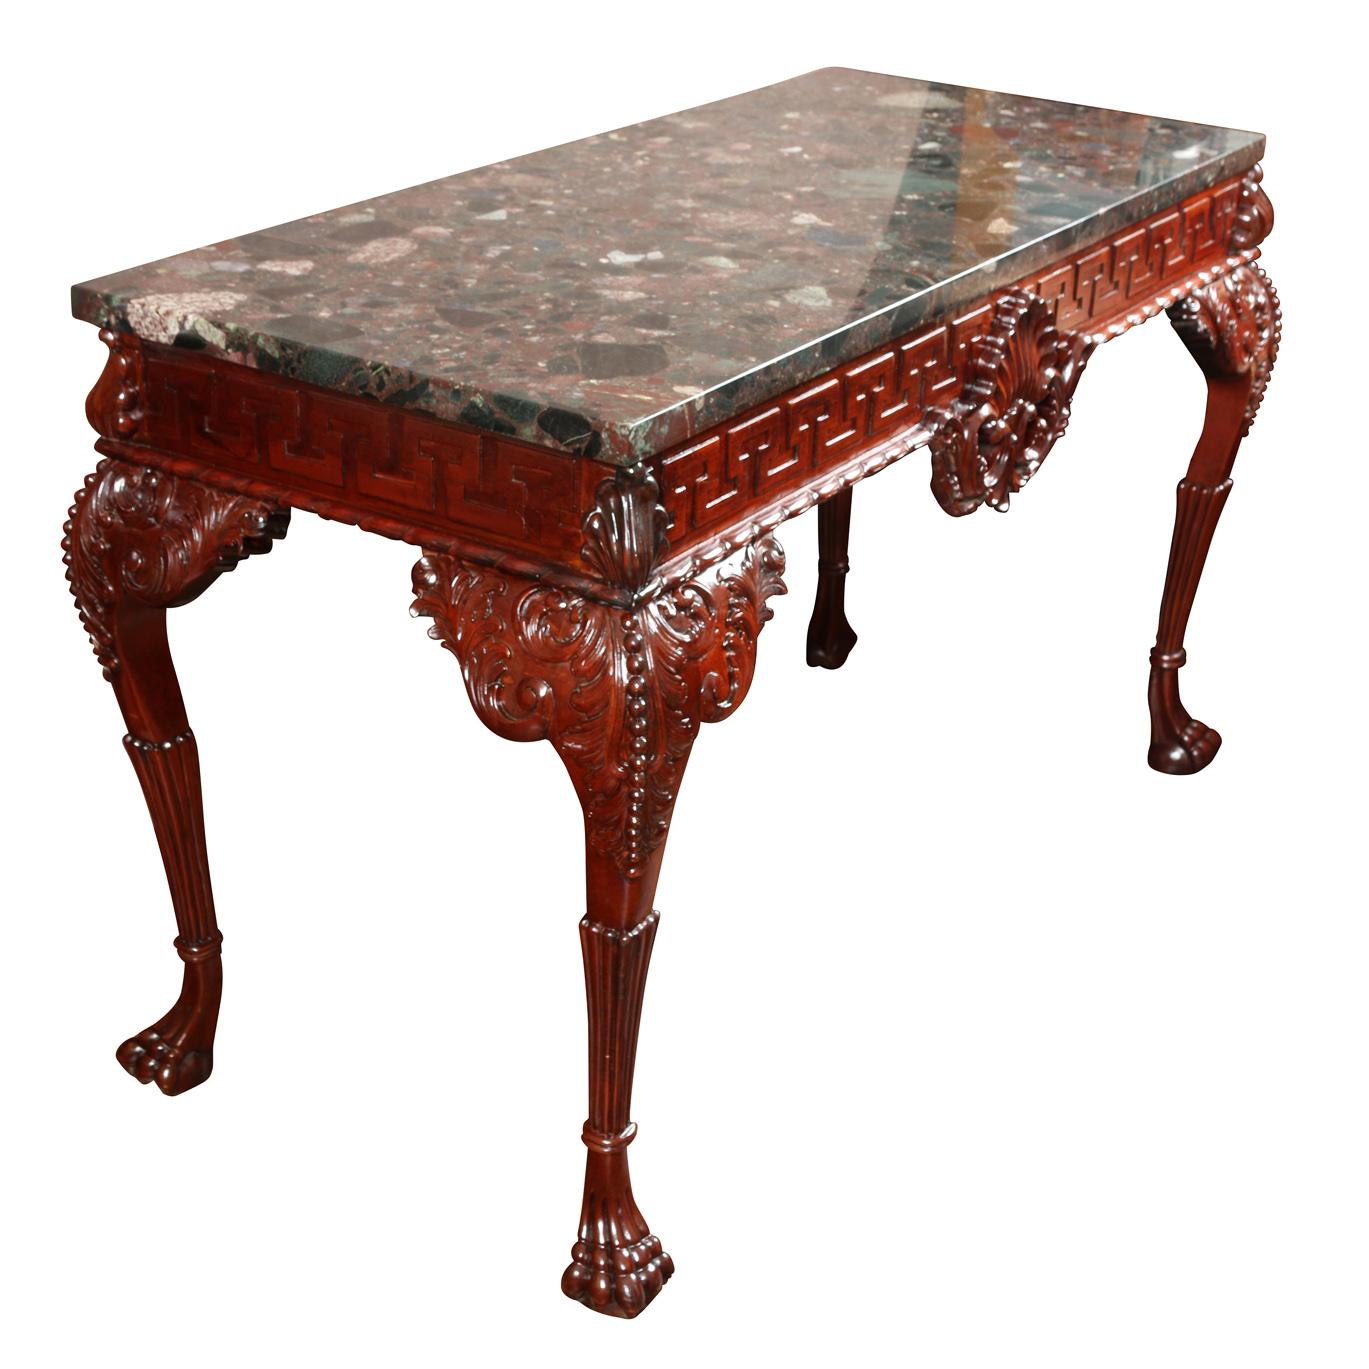 George III English mahogany console table with rare marble top. Greek key detail carved in table apron with shell motif at center. Carved legs finish with claw feet